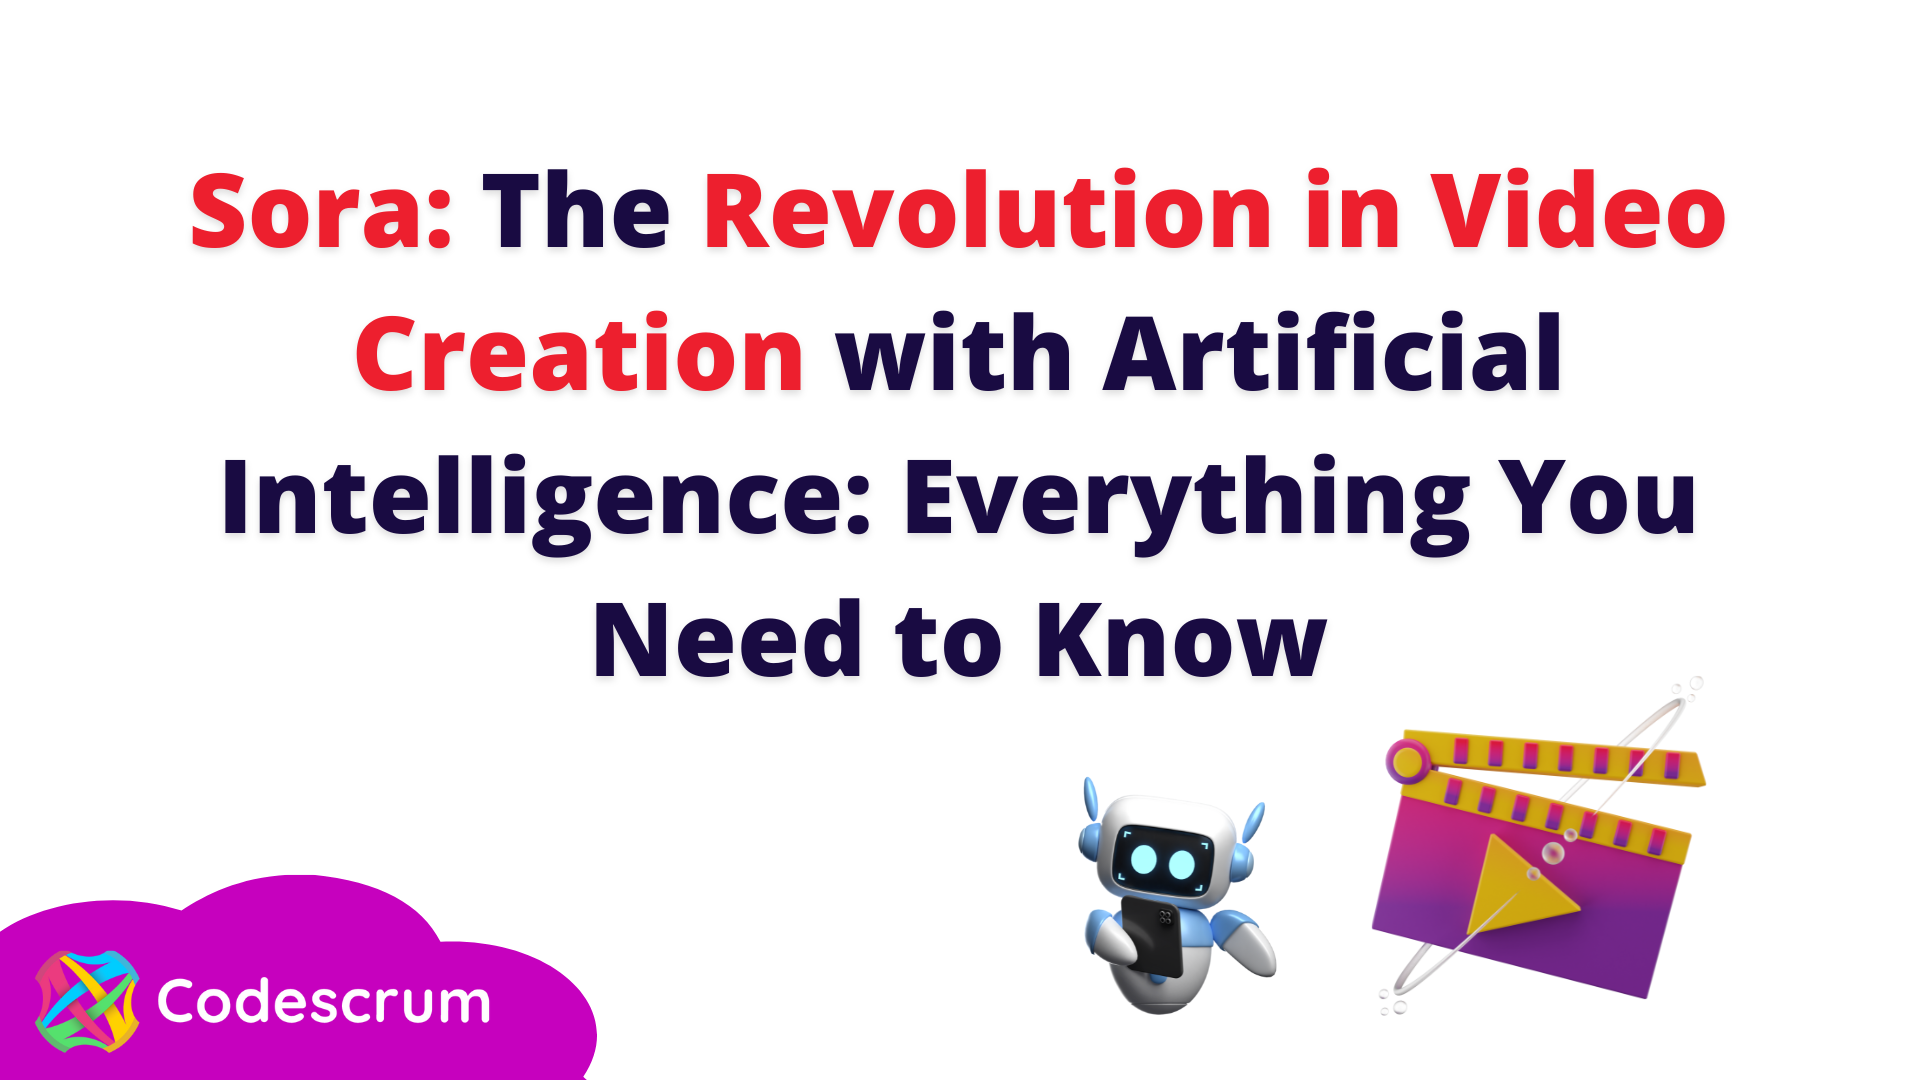 Sora: The Revolution in Video Creation with Artificial Intelligence: Everything You Need to Know